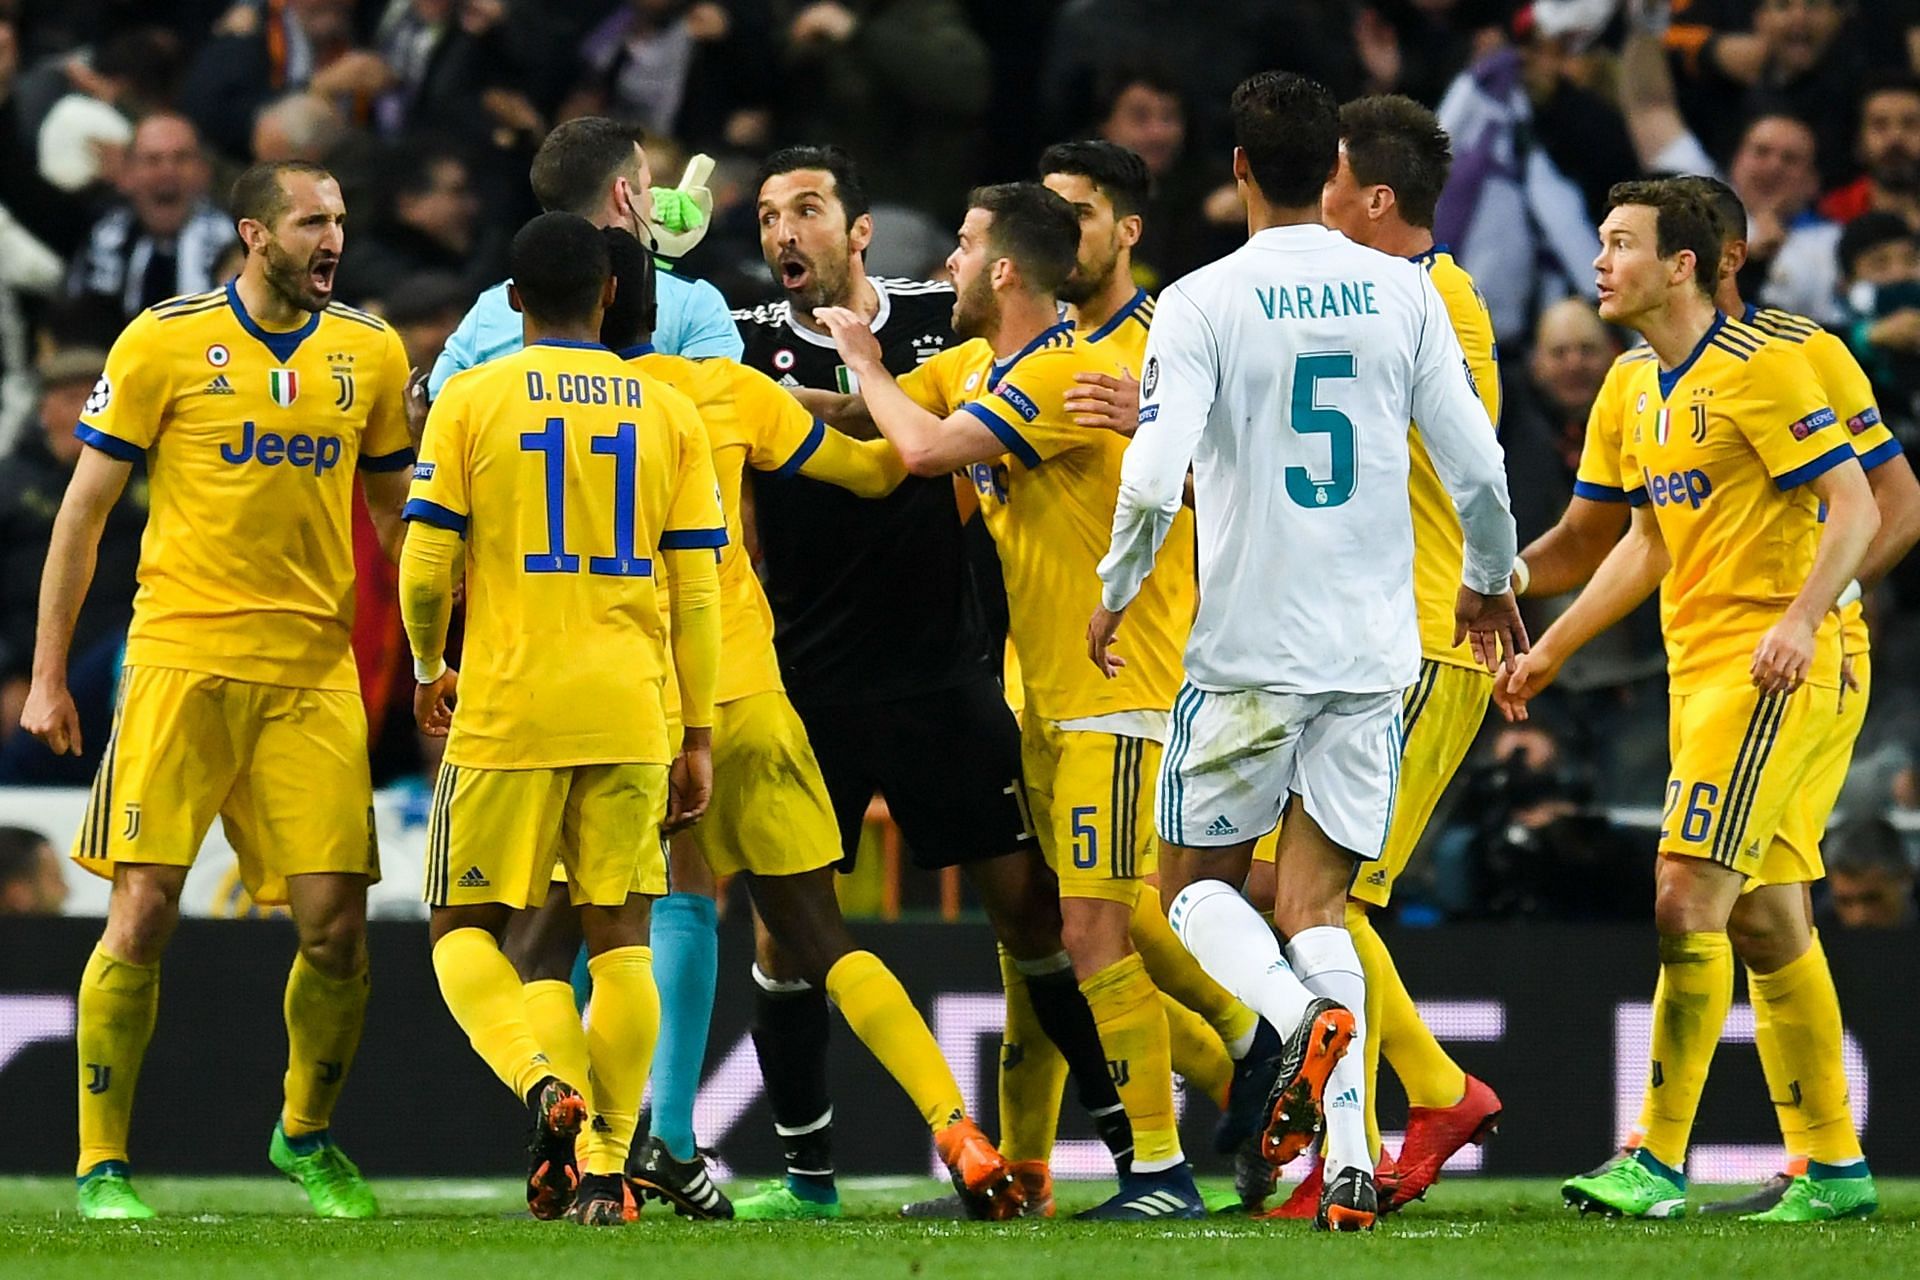 It was a mad Champions League night but Real Madrid prevailed